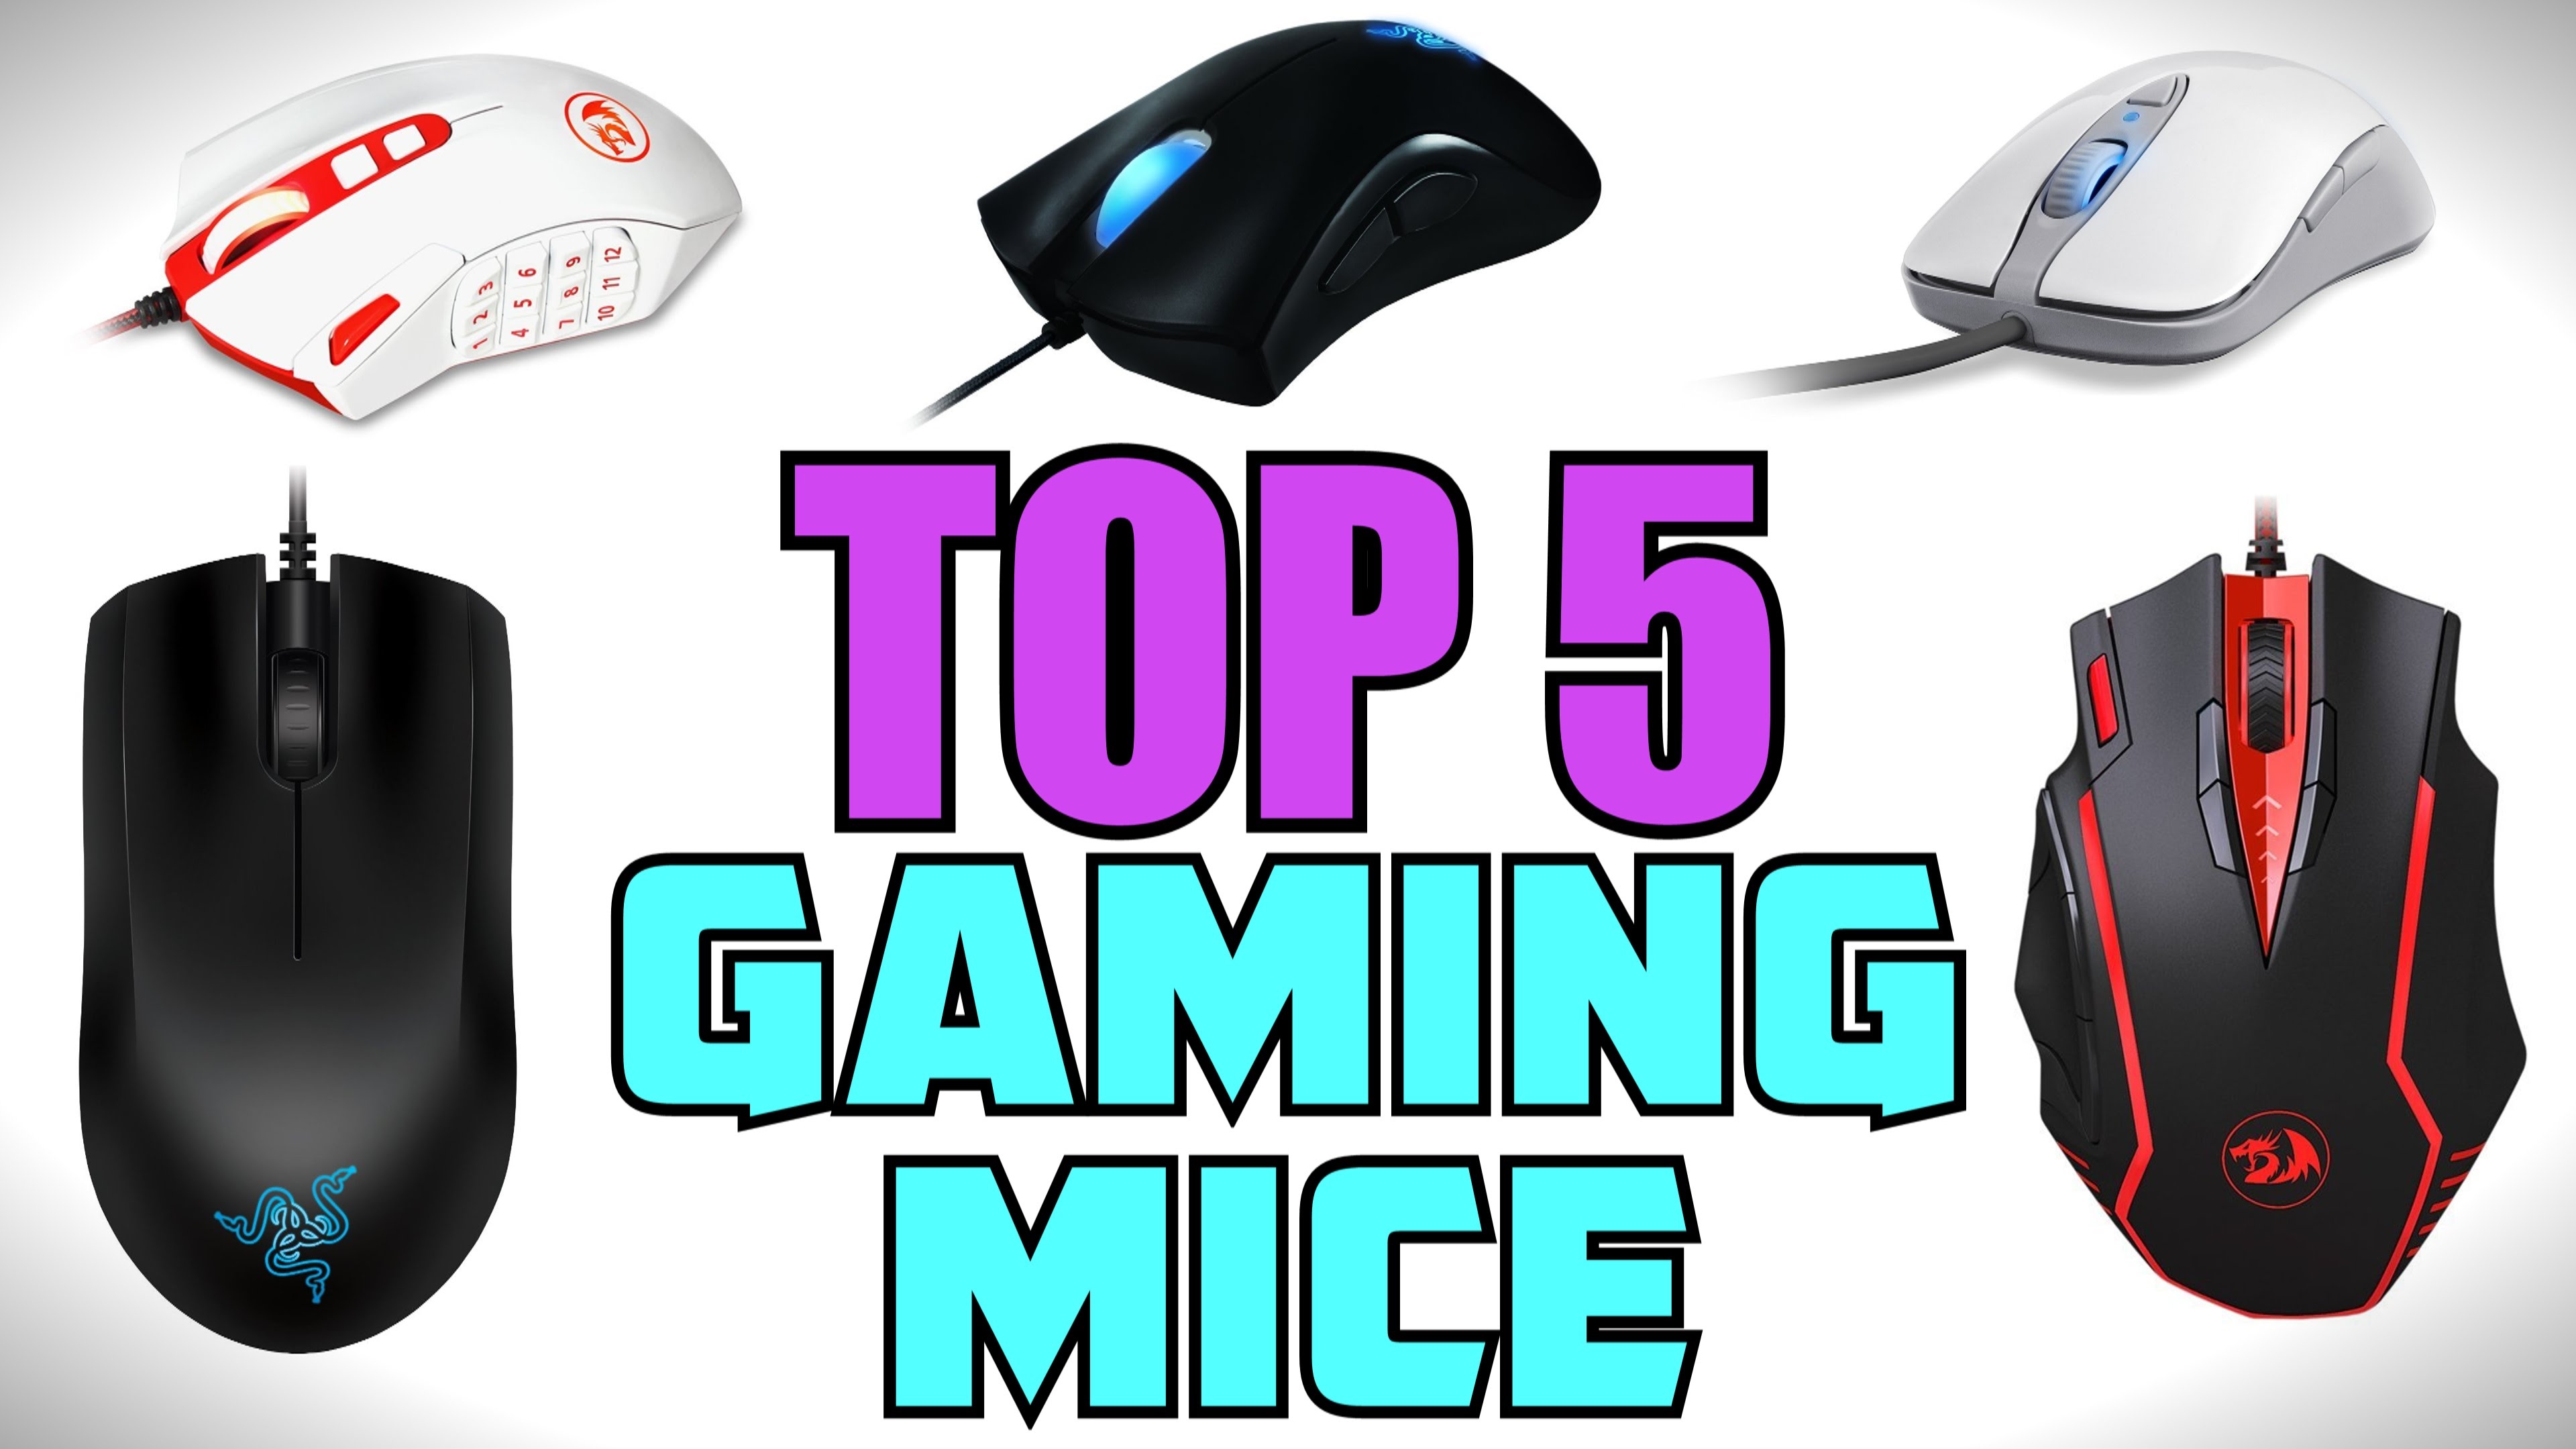 Top 5 gaming. Топ игровых мышей. Bajeal g5 Gaming Mouse. Мышка REDDRAGON Reaping. Mouse Double click gm1070 Gaming easports.